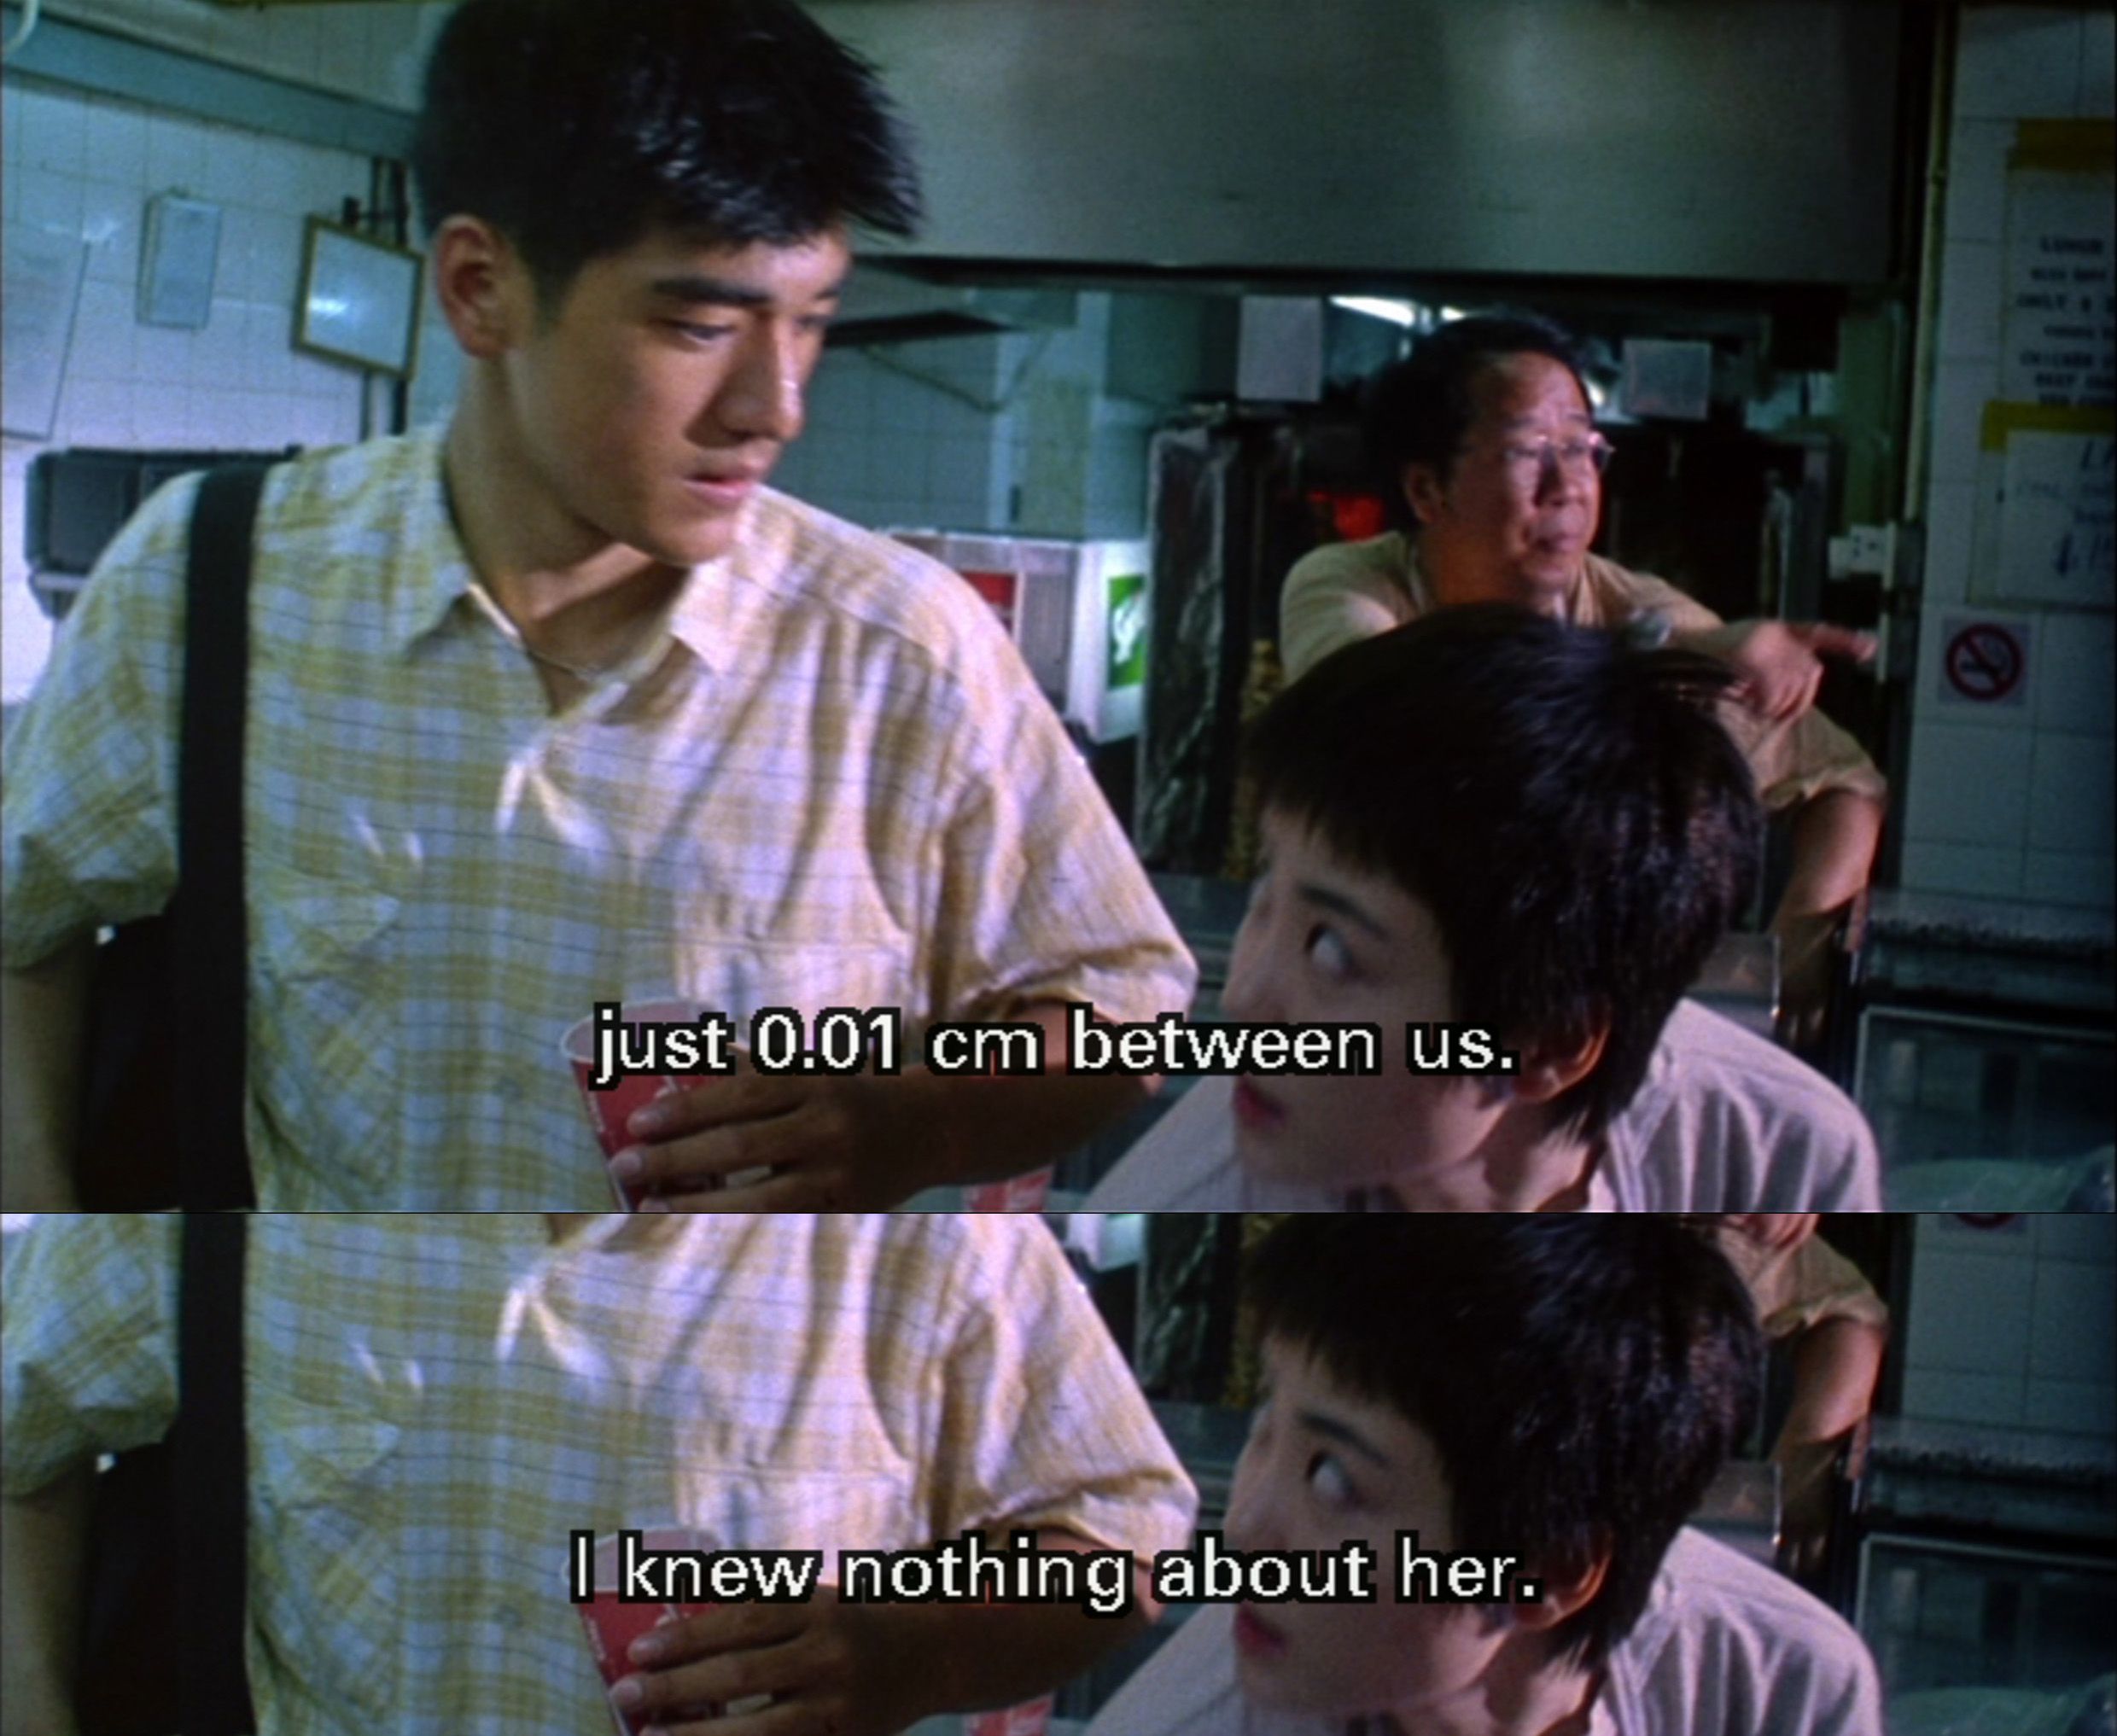 This is a film still from Chungking Express. Faye and He Qiwu meet, bumping into one another and sharing a glance. It reads "just 0.01 cm between us. I knew nothing about her."